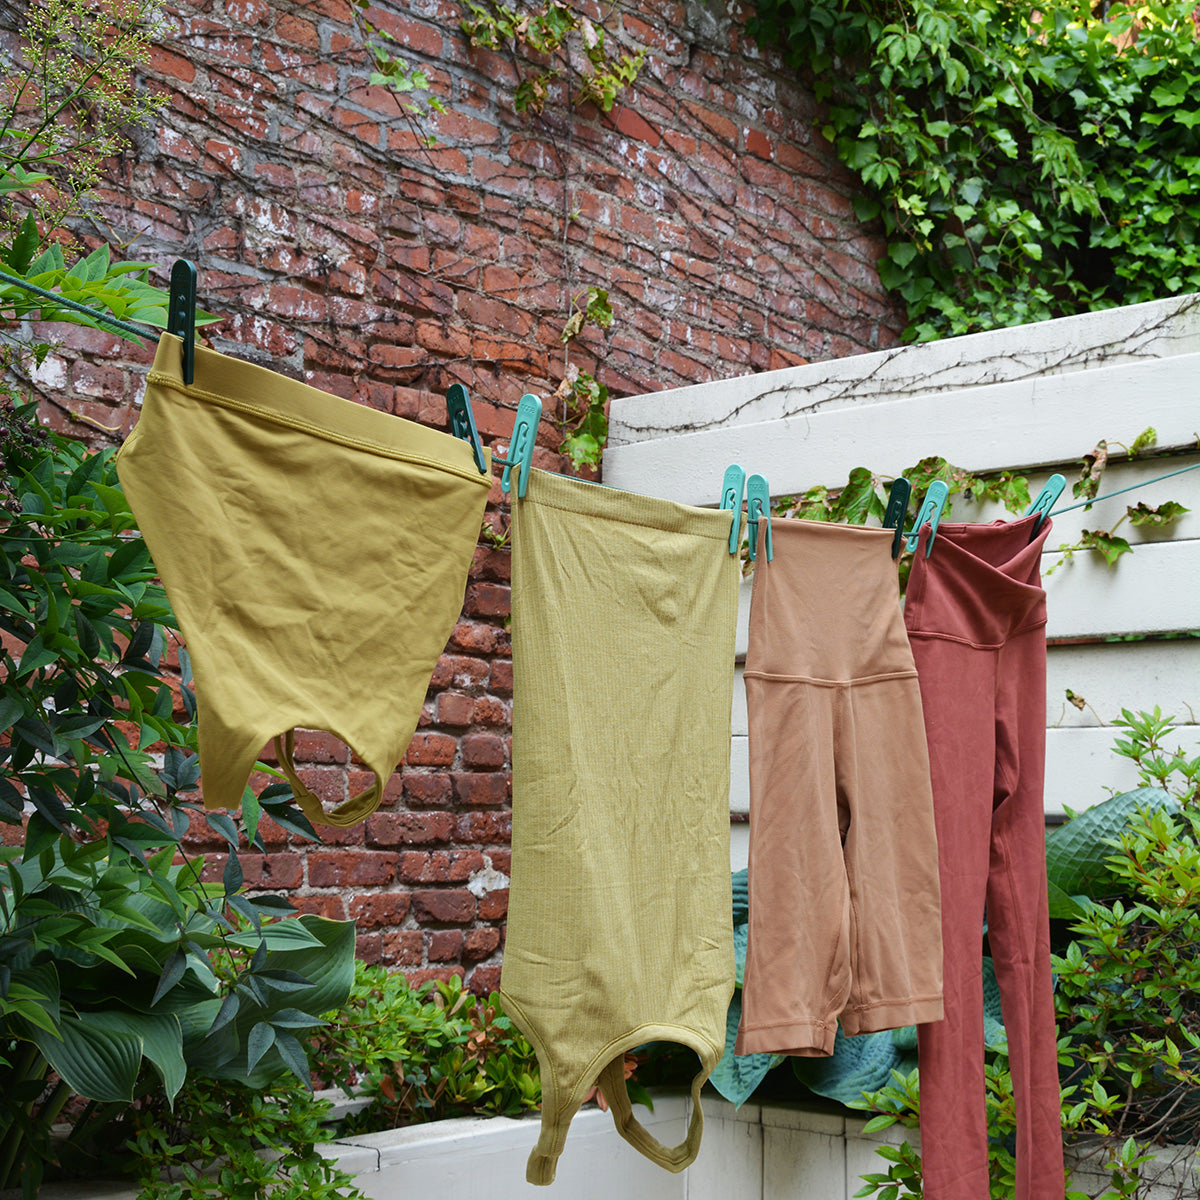 Women's yoga clothes hanging on a clothesline in a leafy backyard